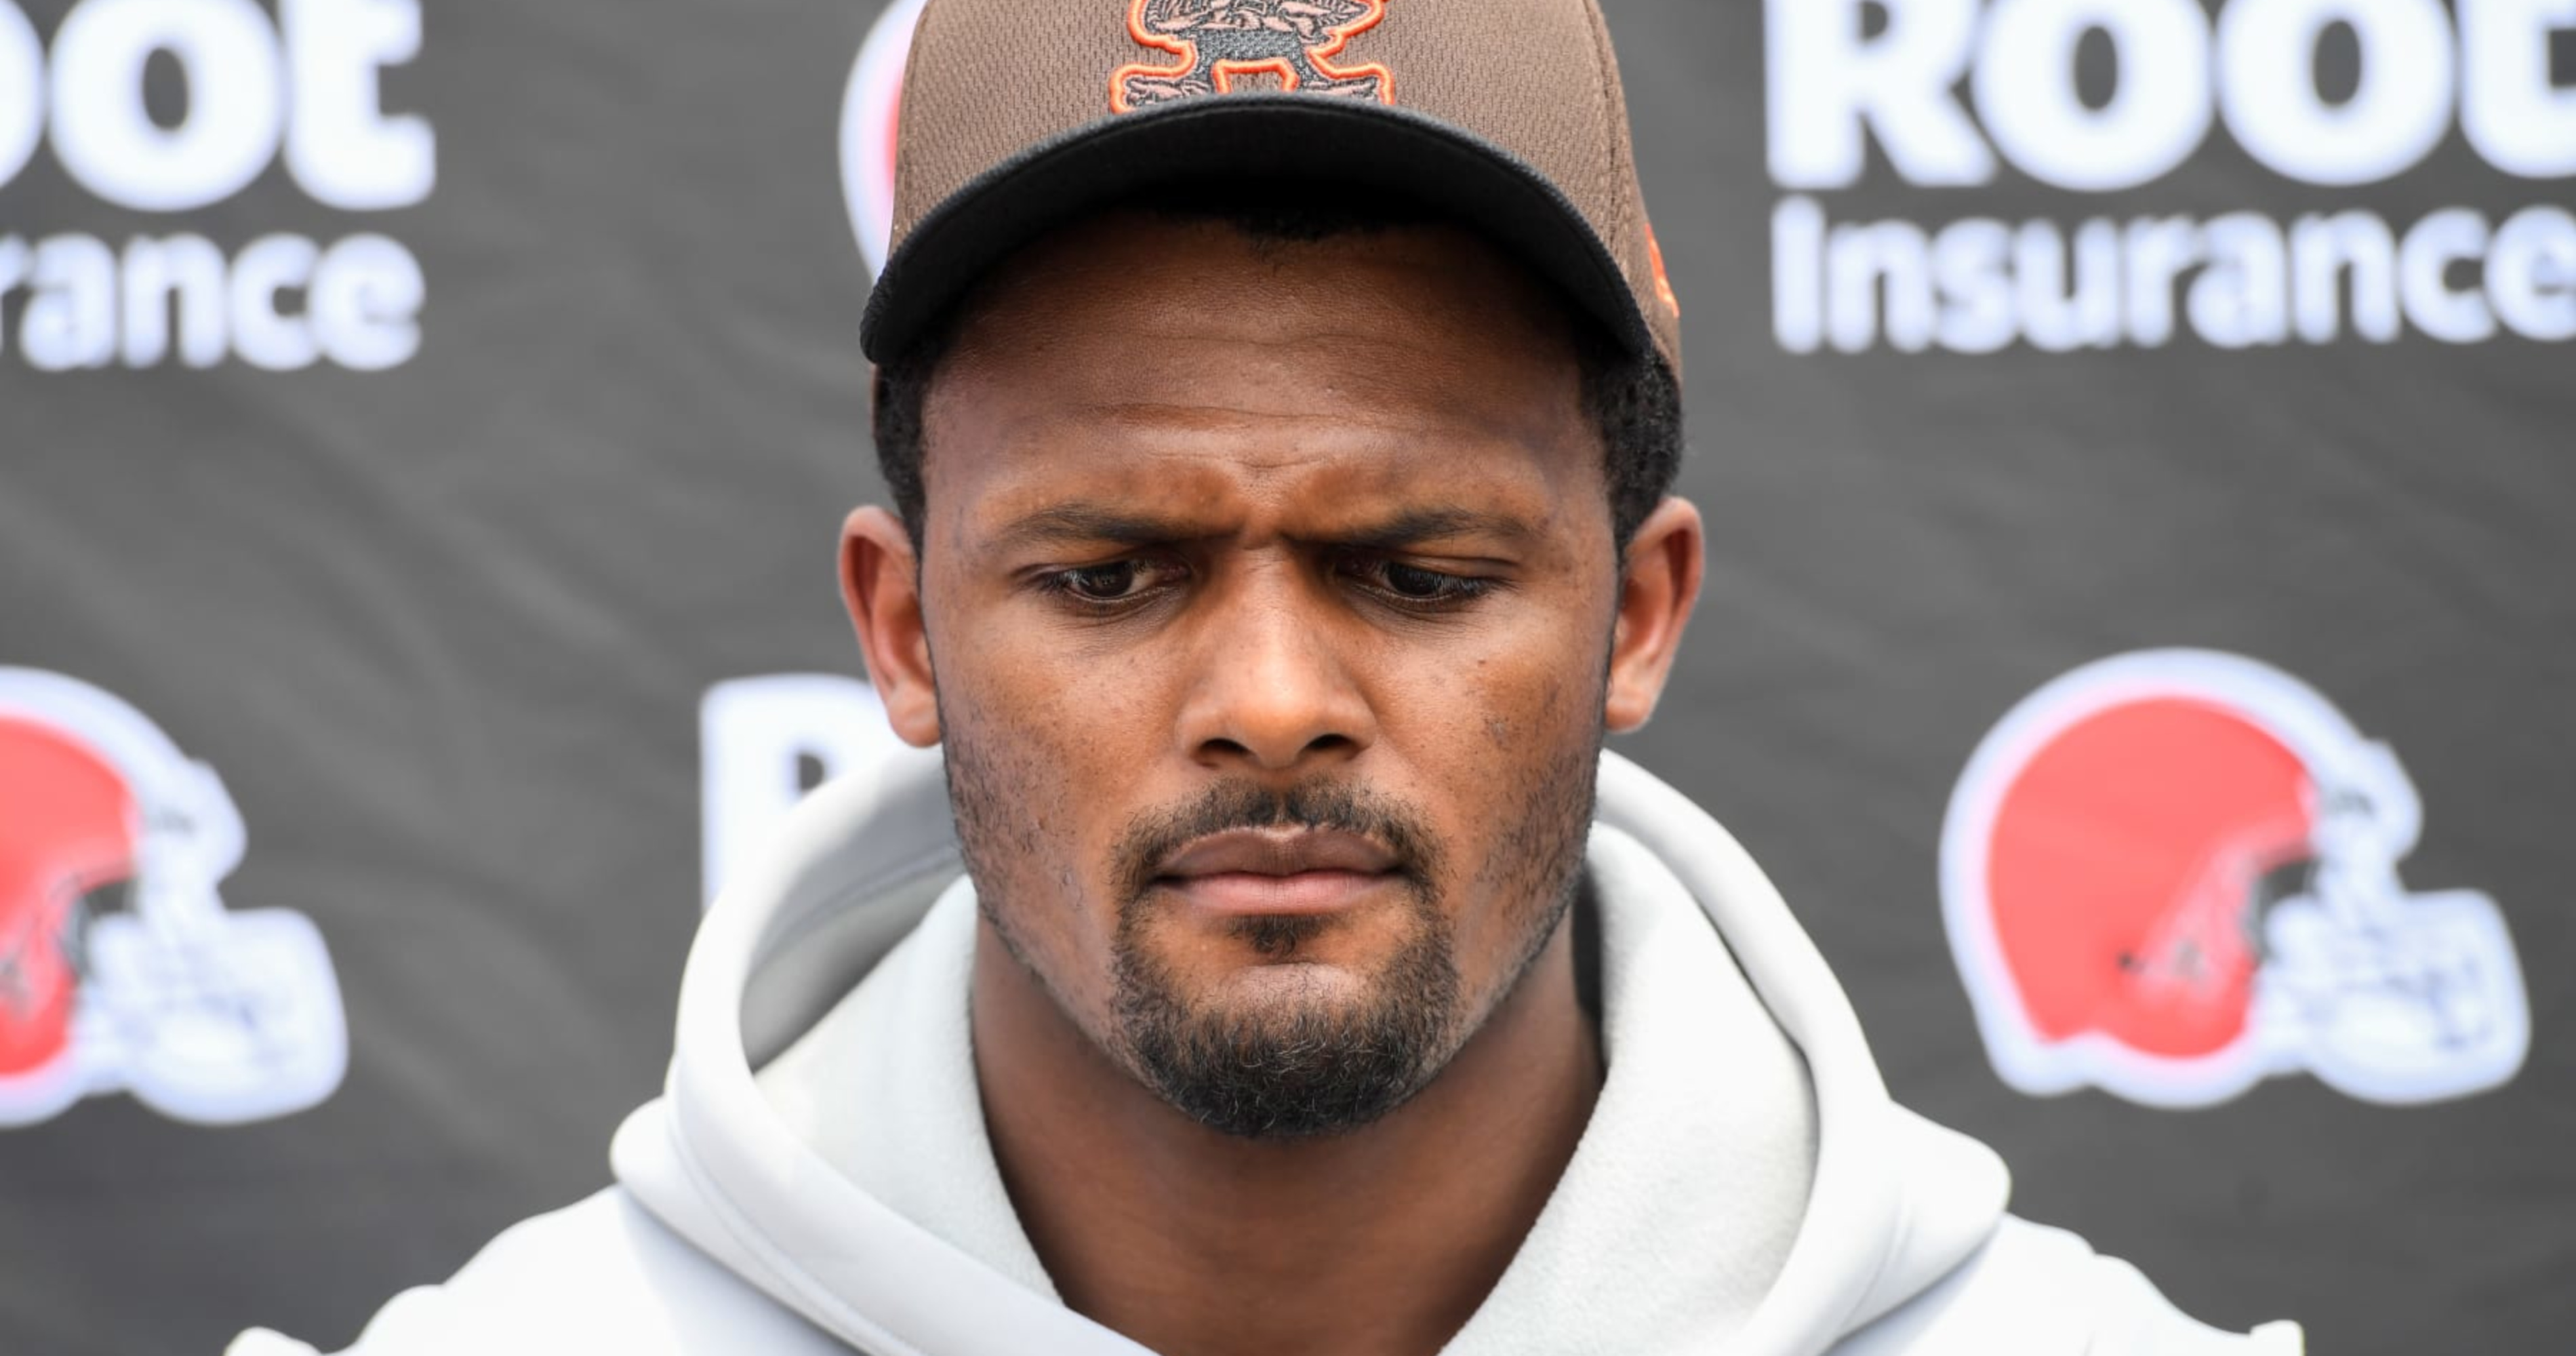 Browns' Deshaun Watson Suspended 11 Games, Fined $5M in Settlement with NFL